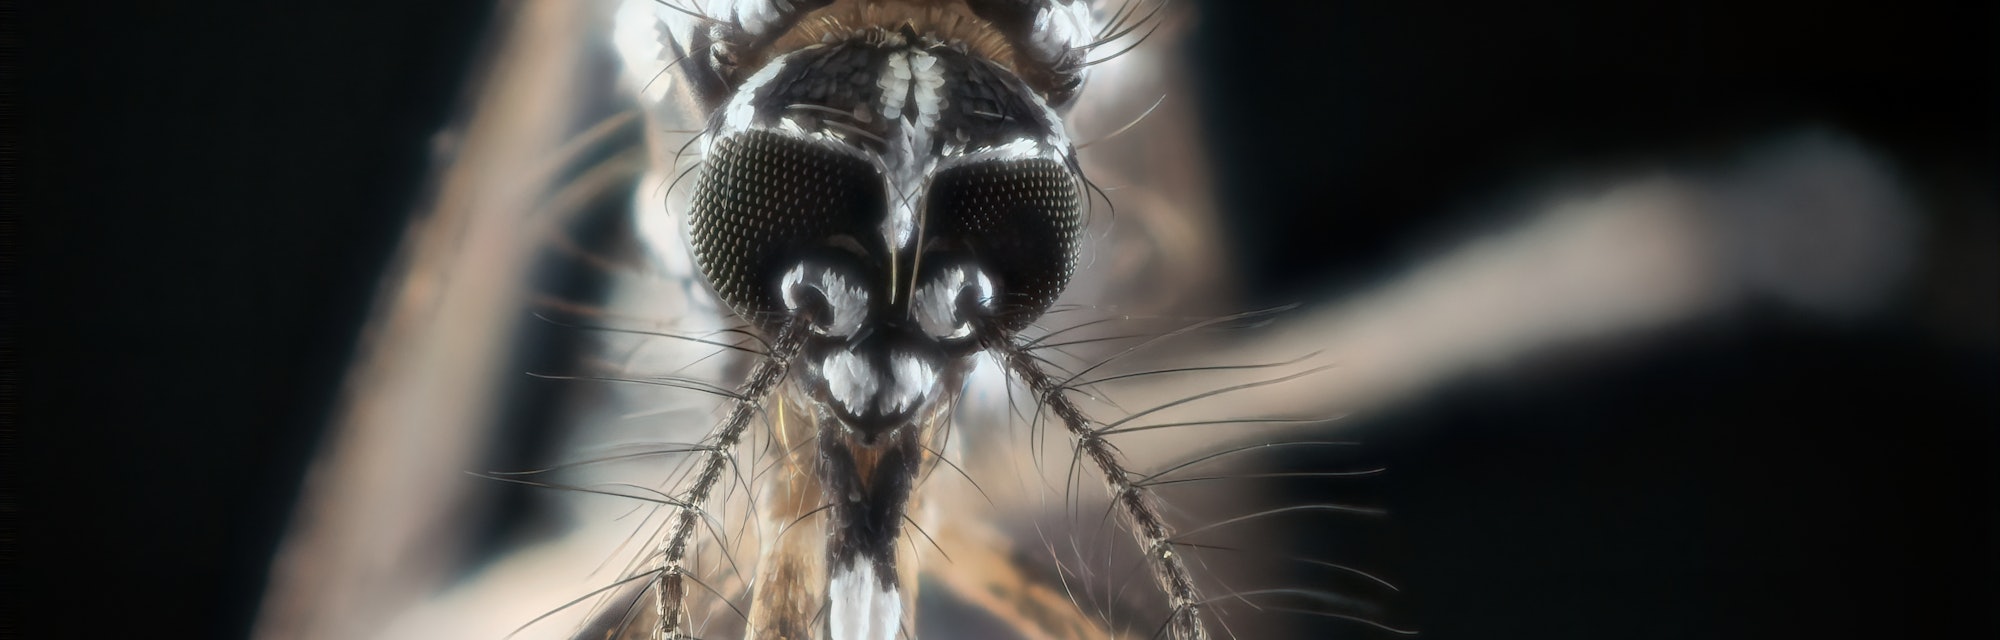 Aedes aegypti mosquito head close-up